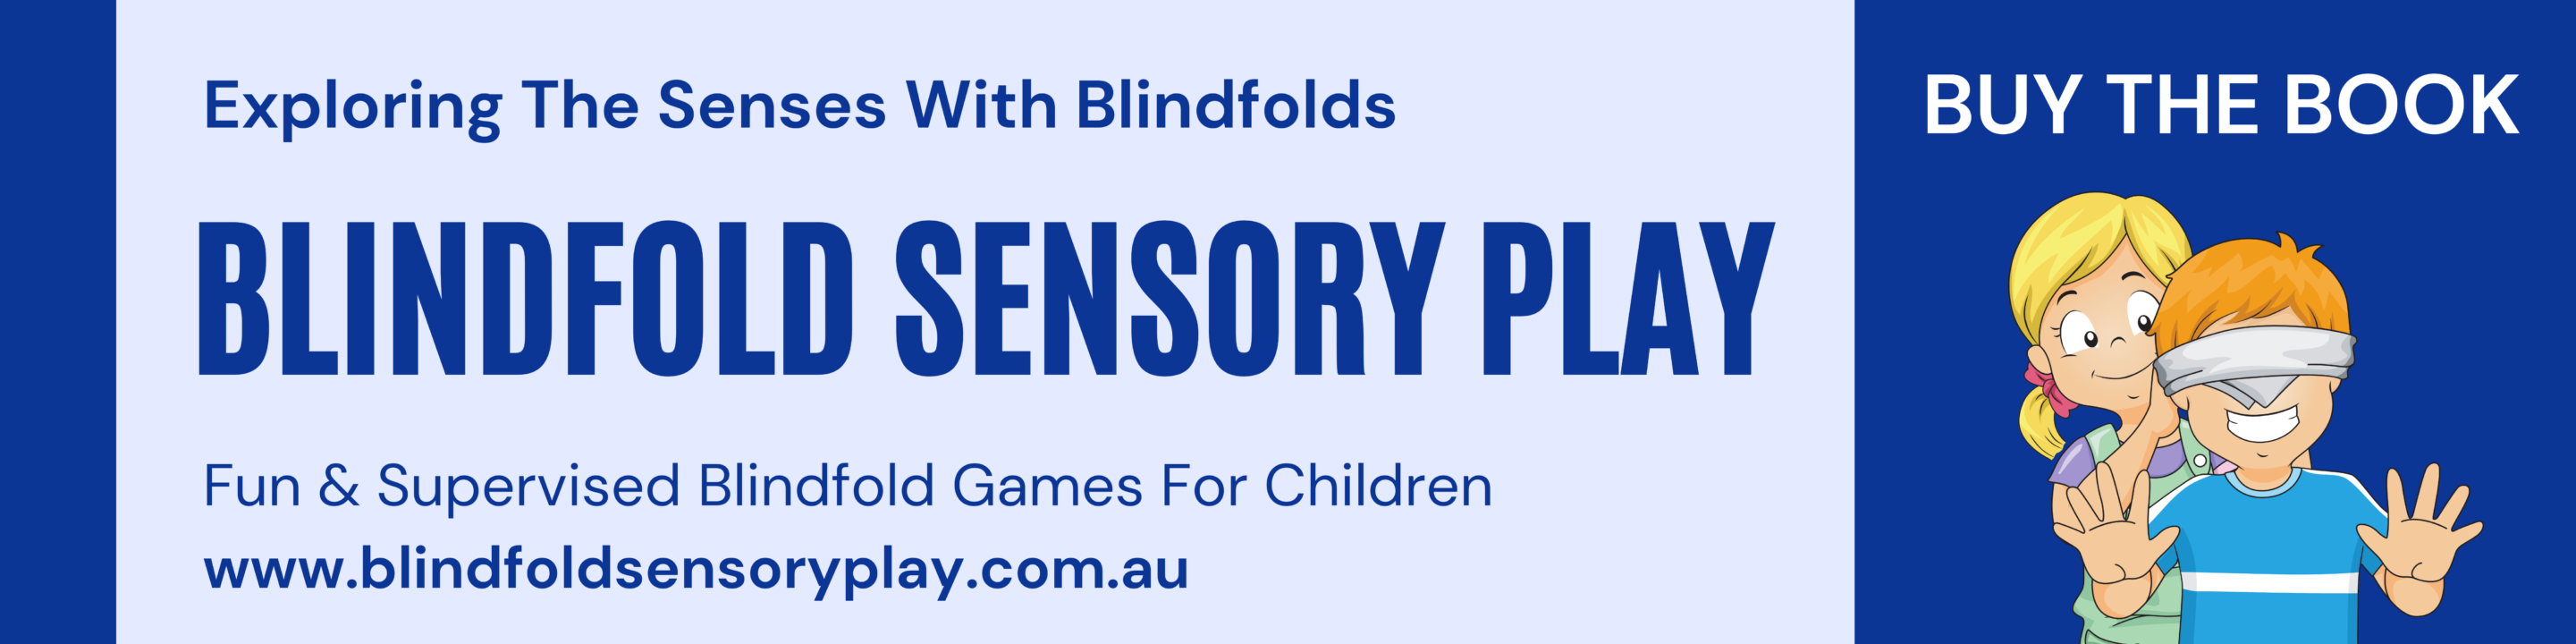 Buy The Book at Blindfold Sensory Plan